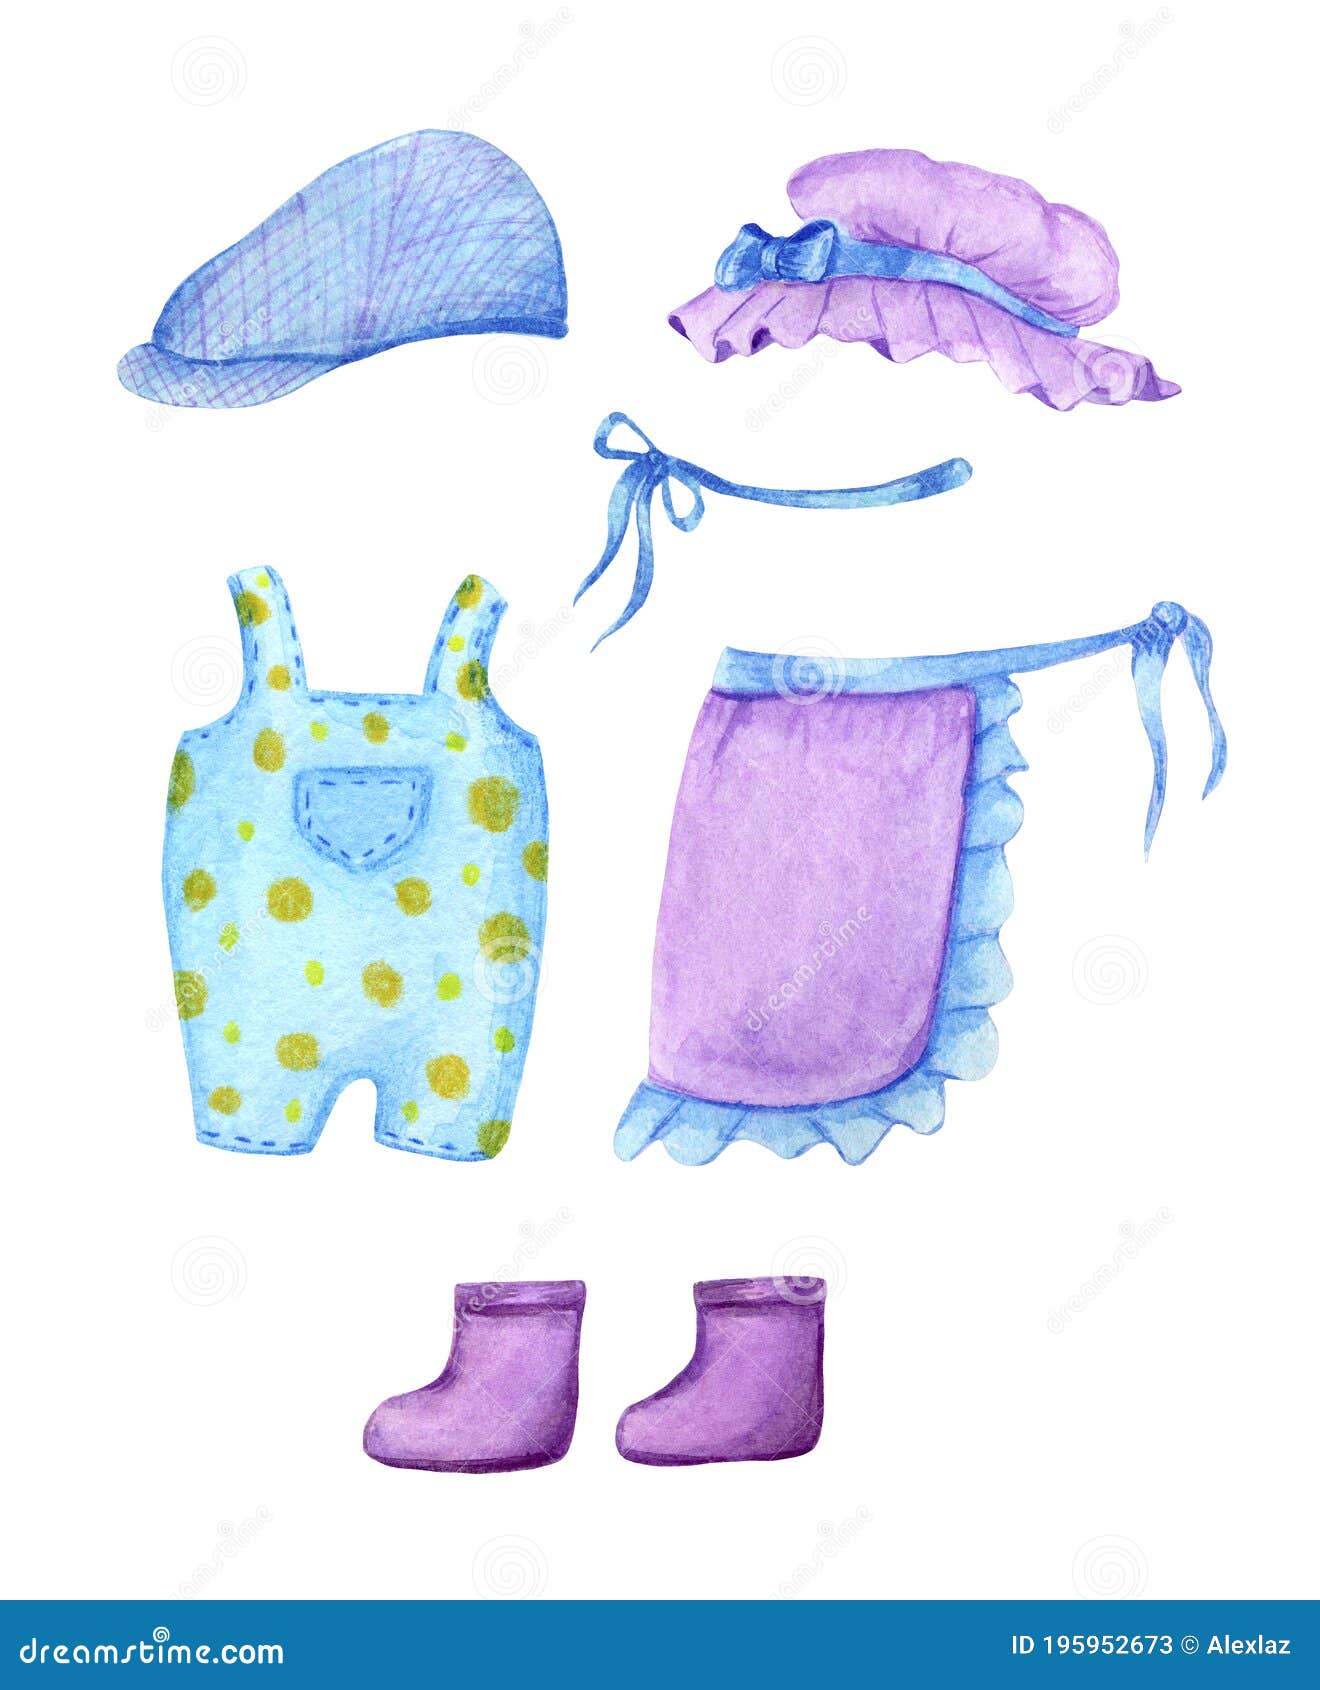 Clipart Garden Clothes in Watercolor in Lilac and Blue Colors. Stock ...